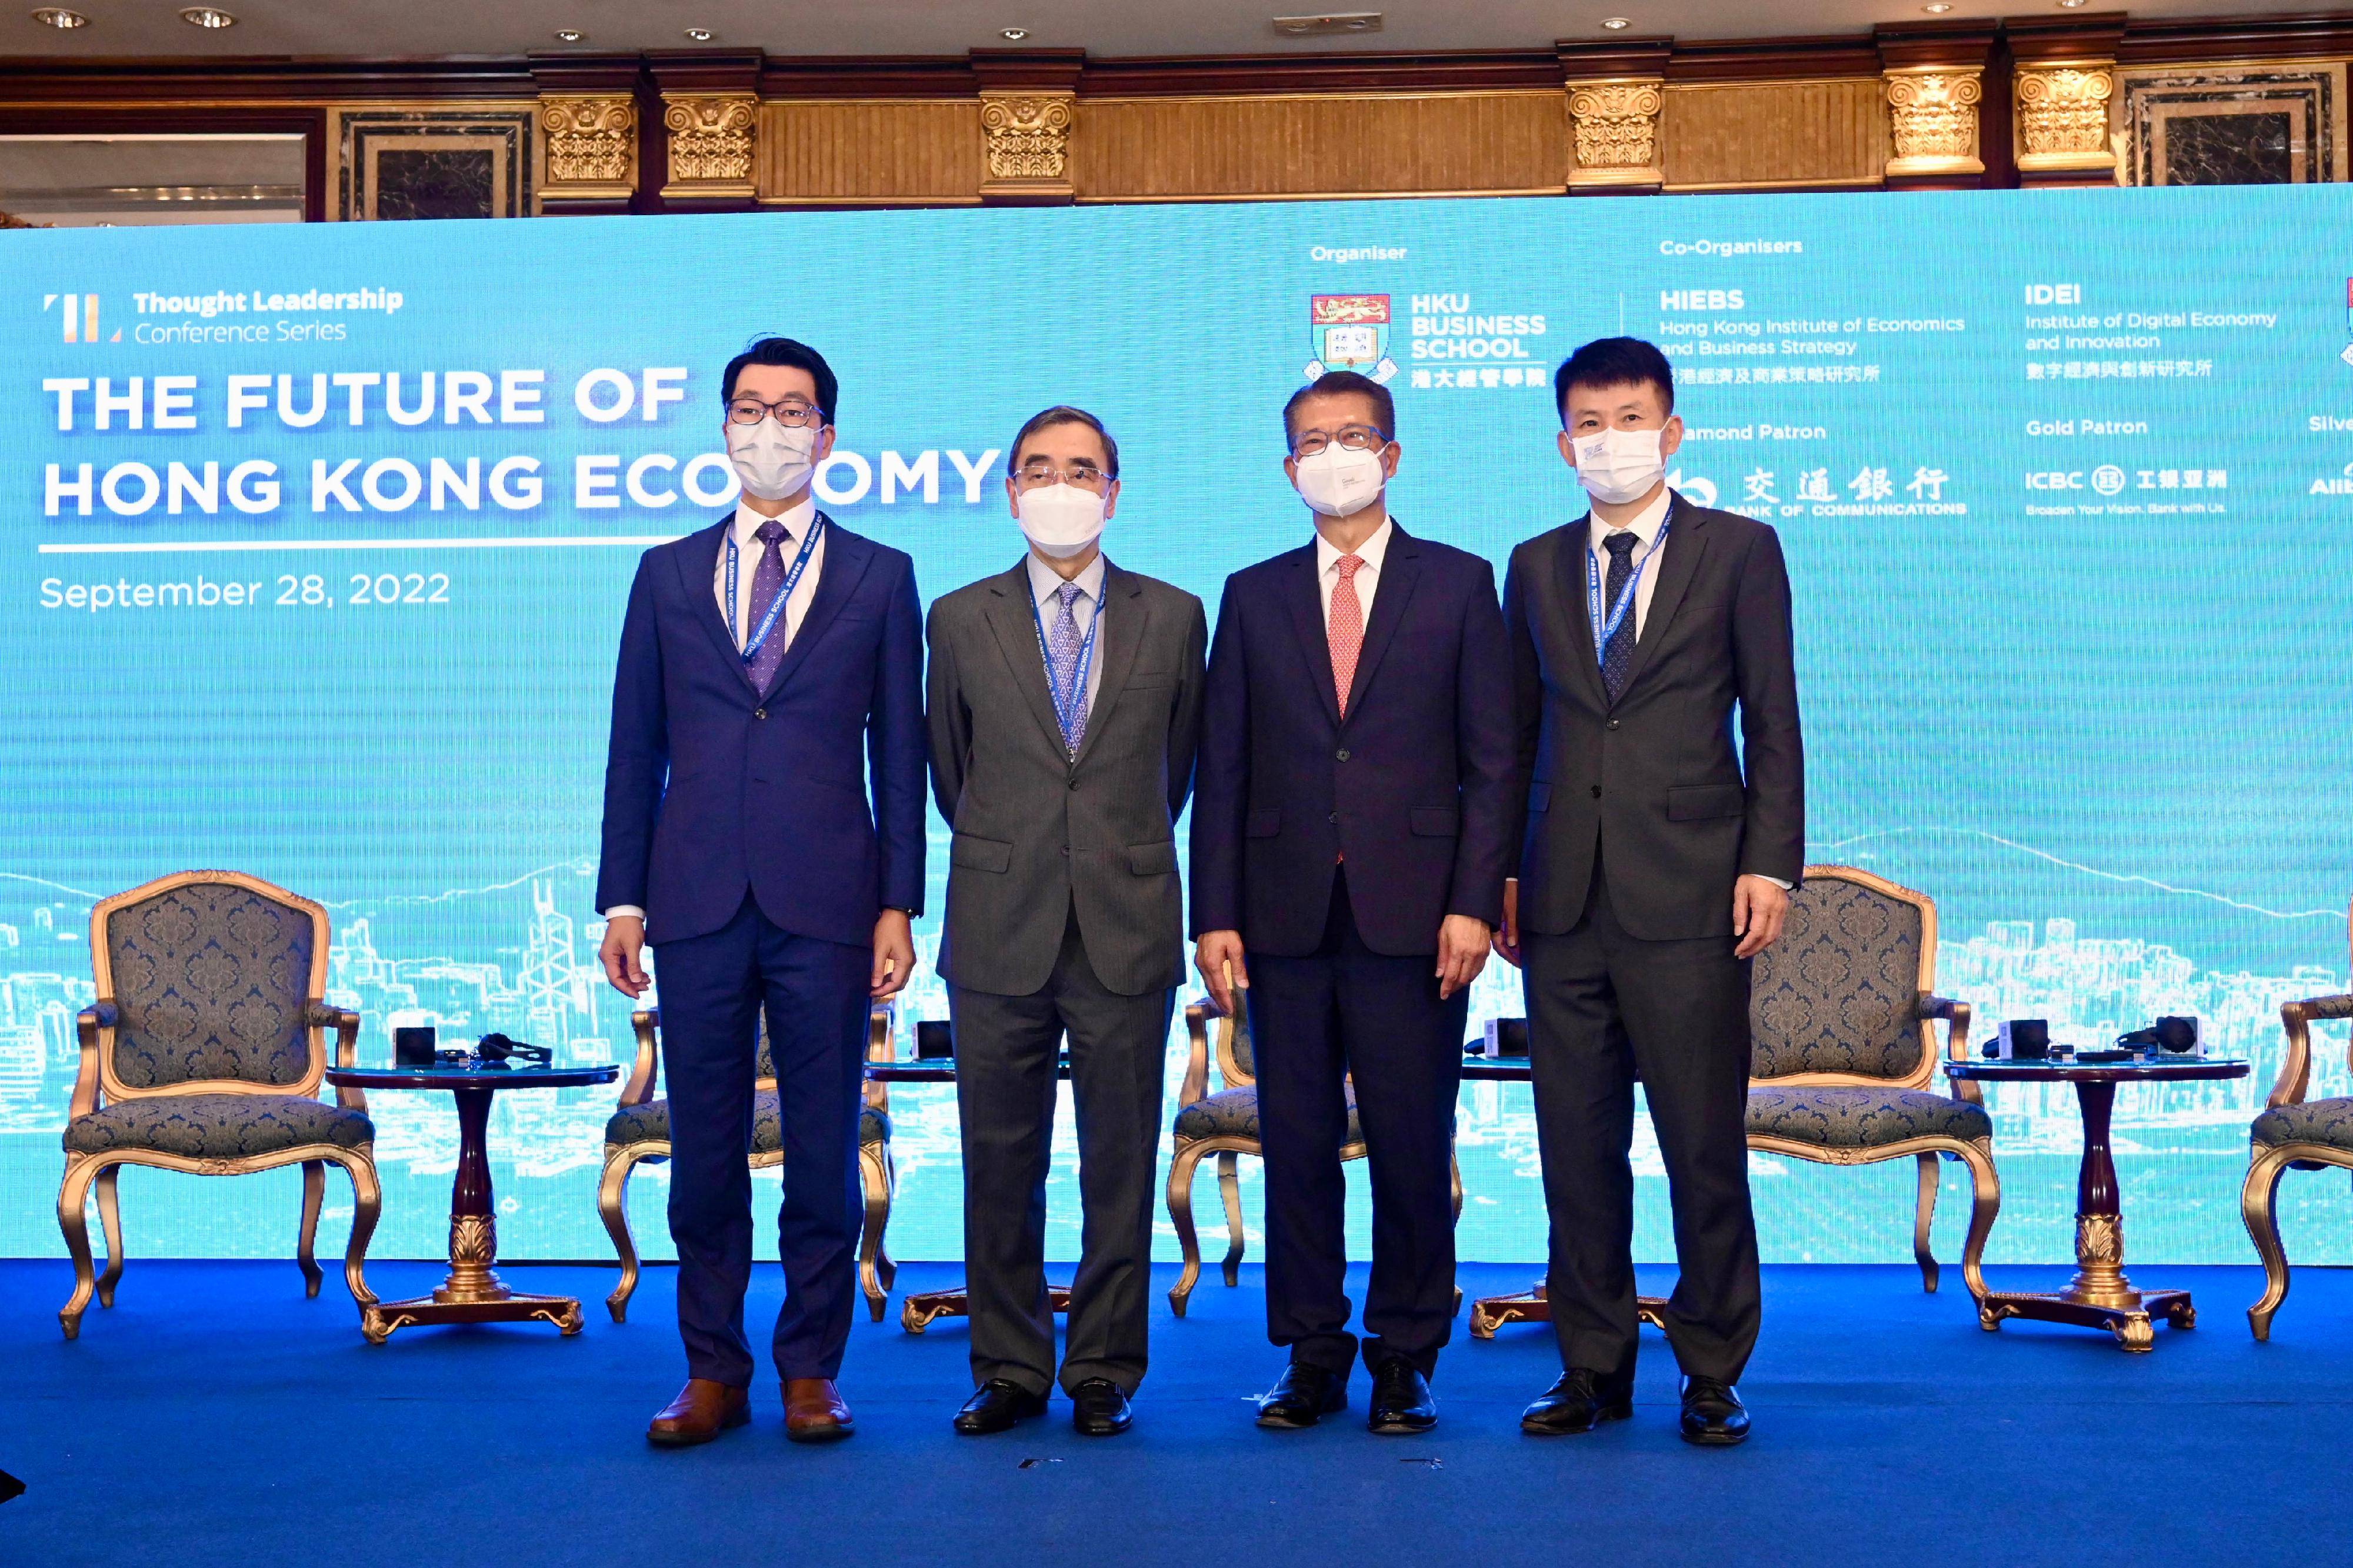 The Financial Secretary, Mr Paul Chan, attended the conference on "The Future of Hong Kong Economy" organised by the University of Hong Kong (HKU) Business School today (September 28). Photo shows (from left) Professor in Economics of the HKU Business School and Associate Director of the Hong Kong Institute of Economics and Business Strategy (HIEBS) Professor Tang Heiwai; the Provost and Deputy Vice-Chancellor of HKU and Director of HIEBS, Professor Richard Wong; Mr Chan; and the Dean of the HKU Business School, Professor Cai Hongbin.